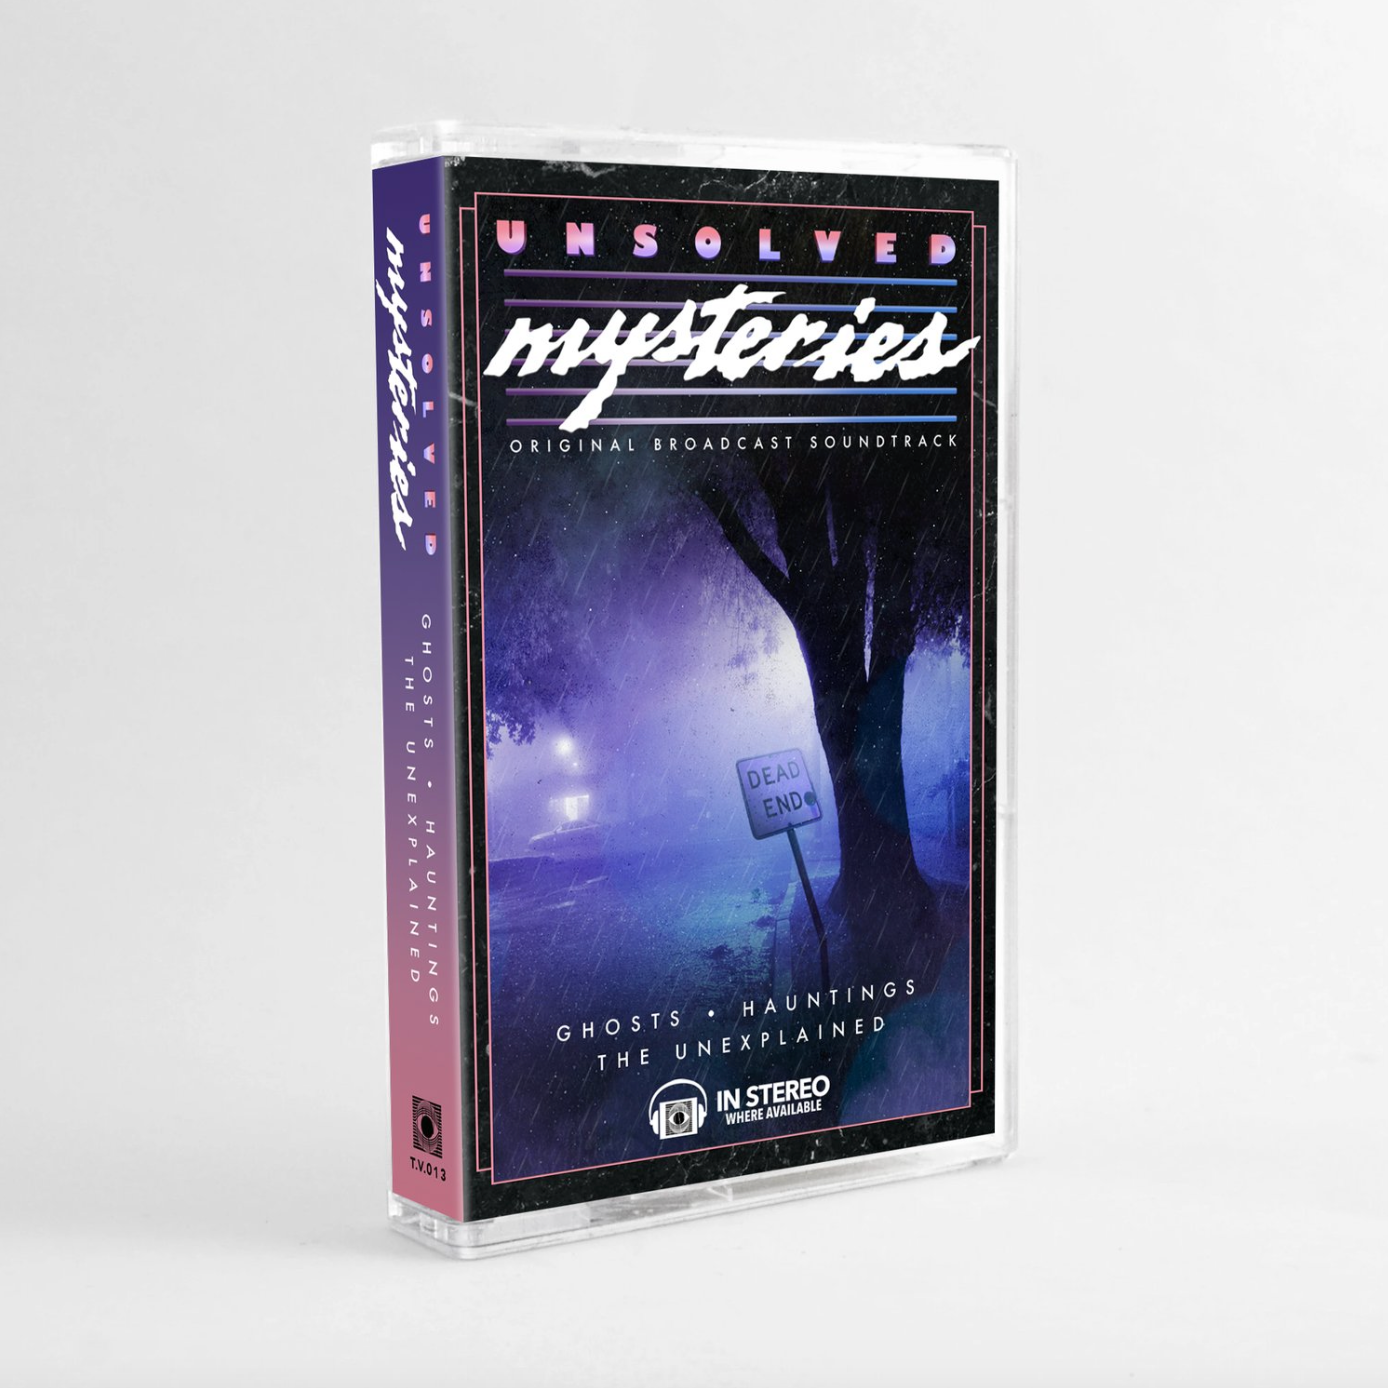 Unsolved Mysteries Vol 1 OST Cassette